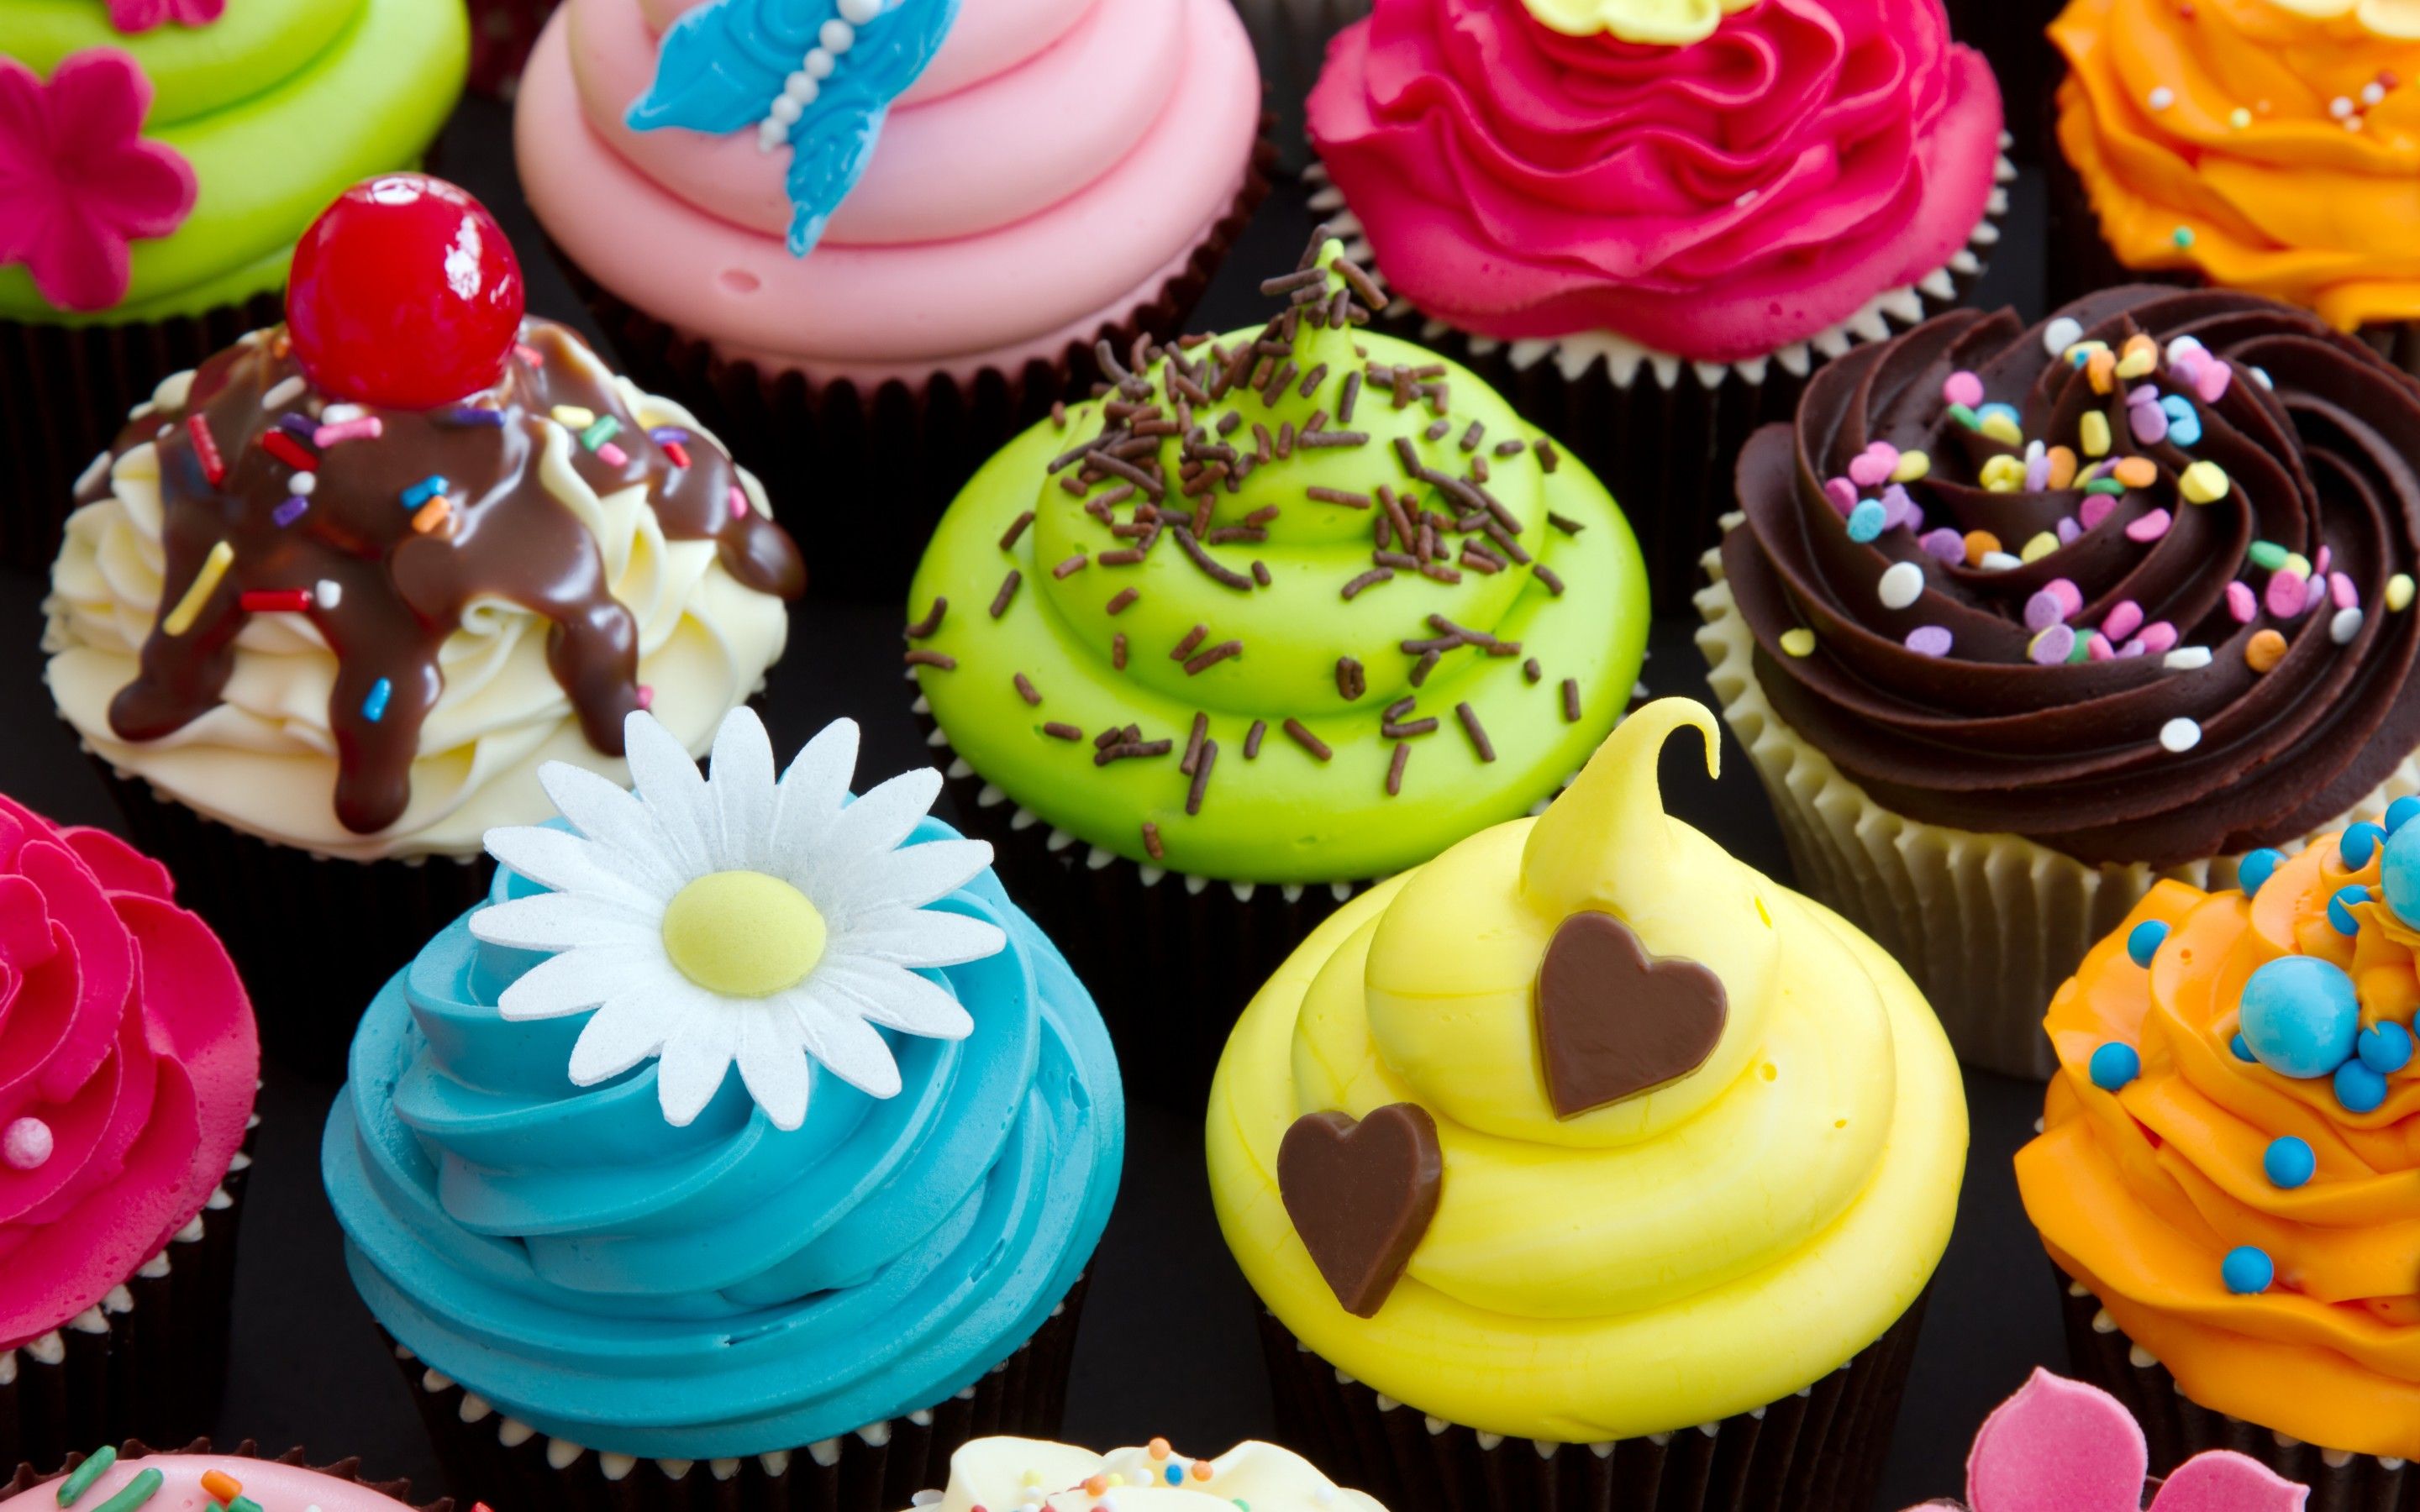 A close up of many different colored cupcakes - Cupcakes